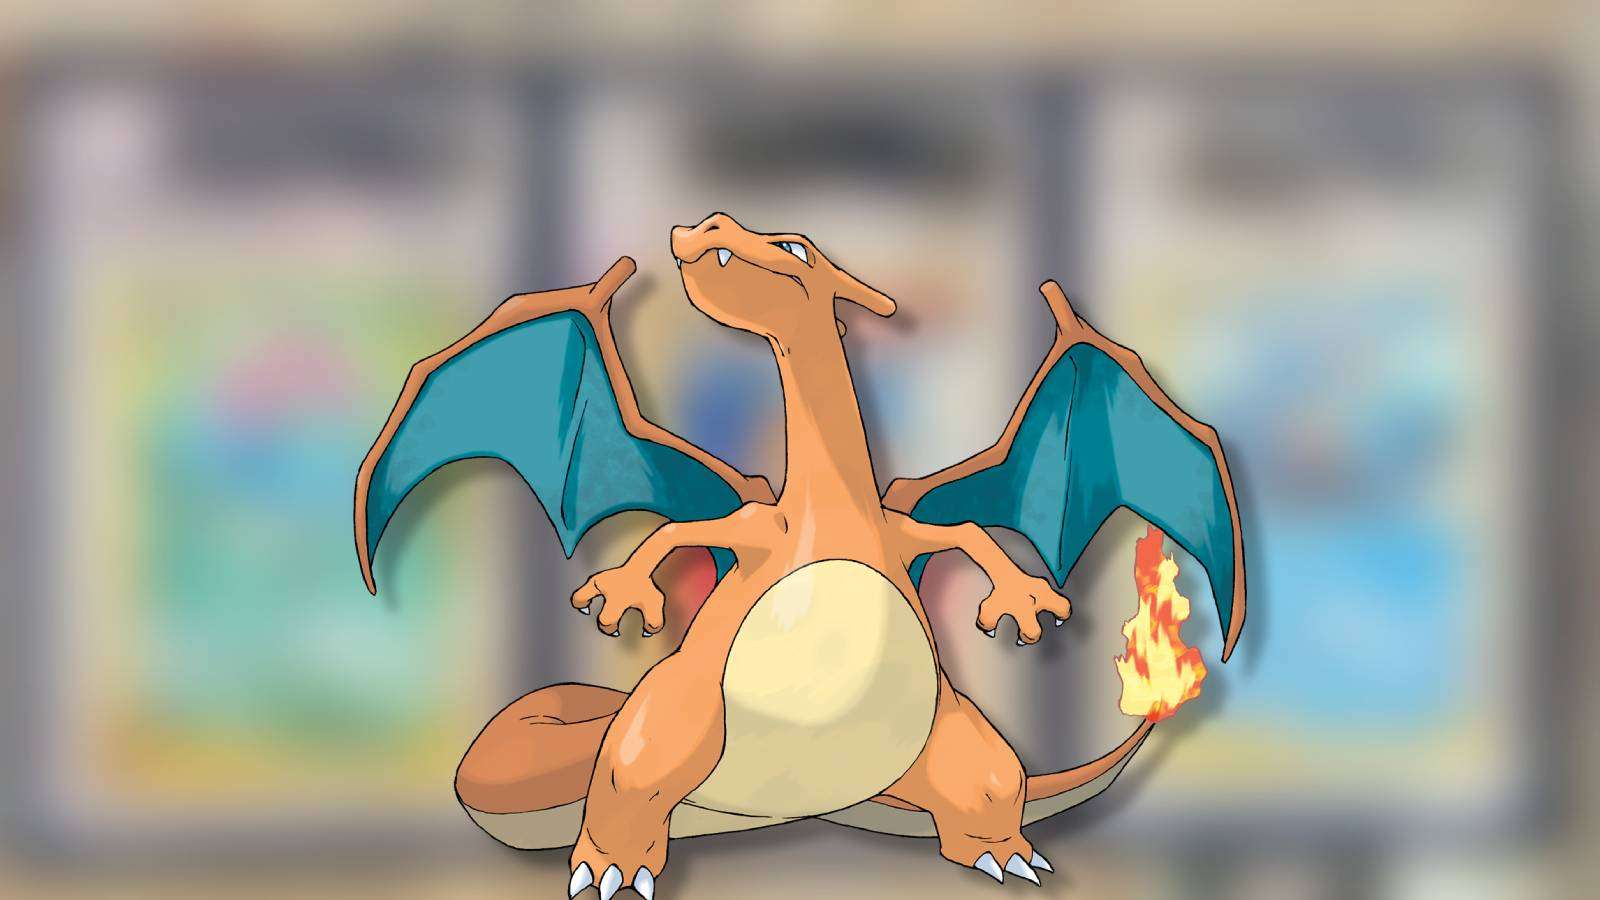 The Pokemon Charizard appears against a blurred background